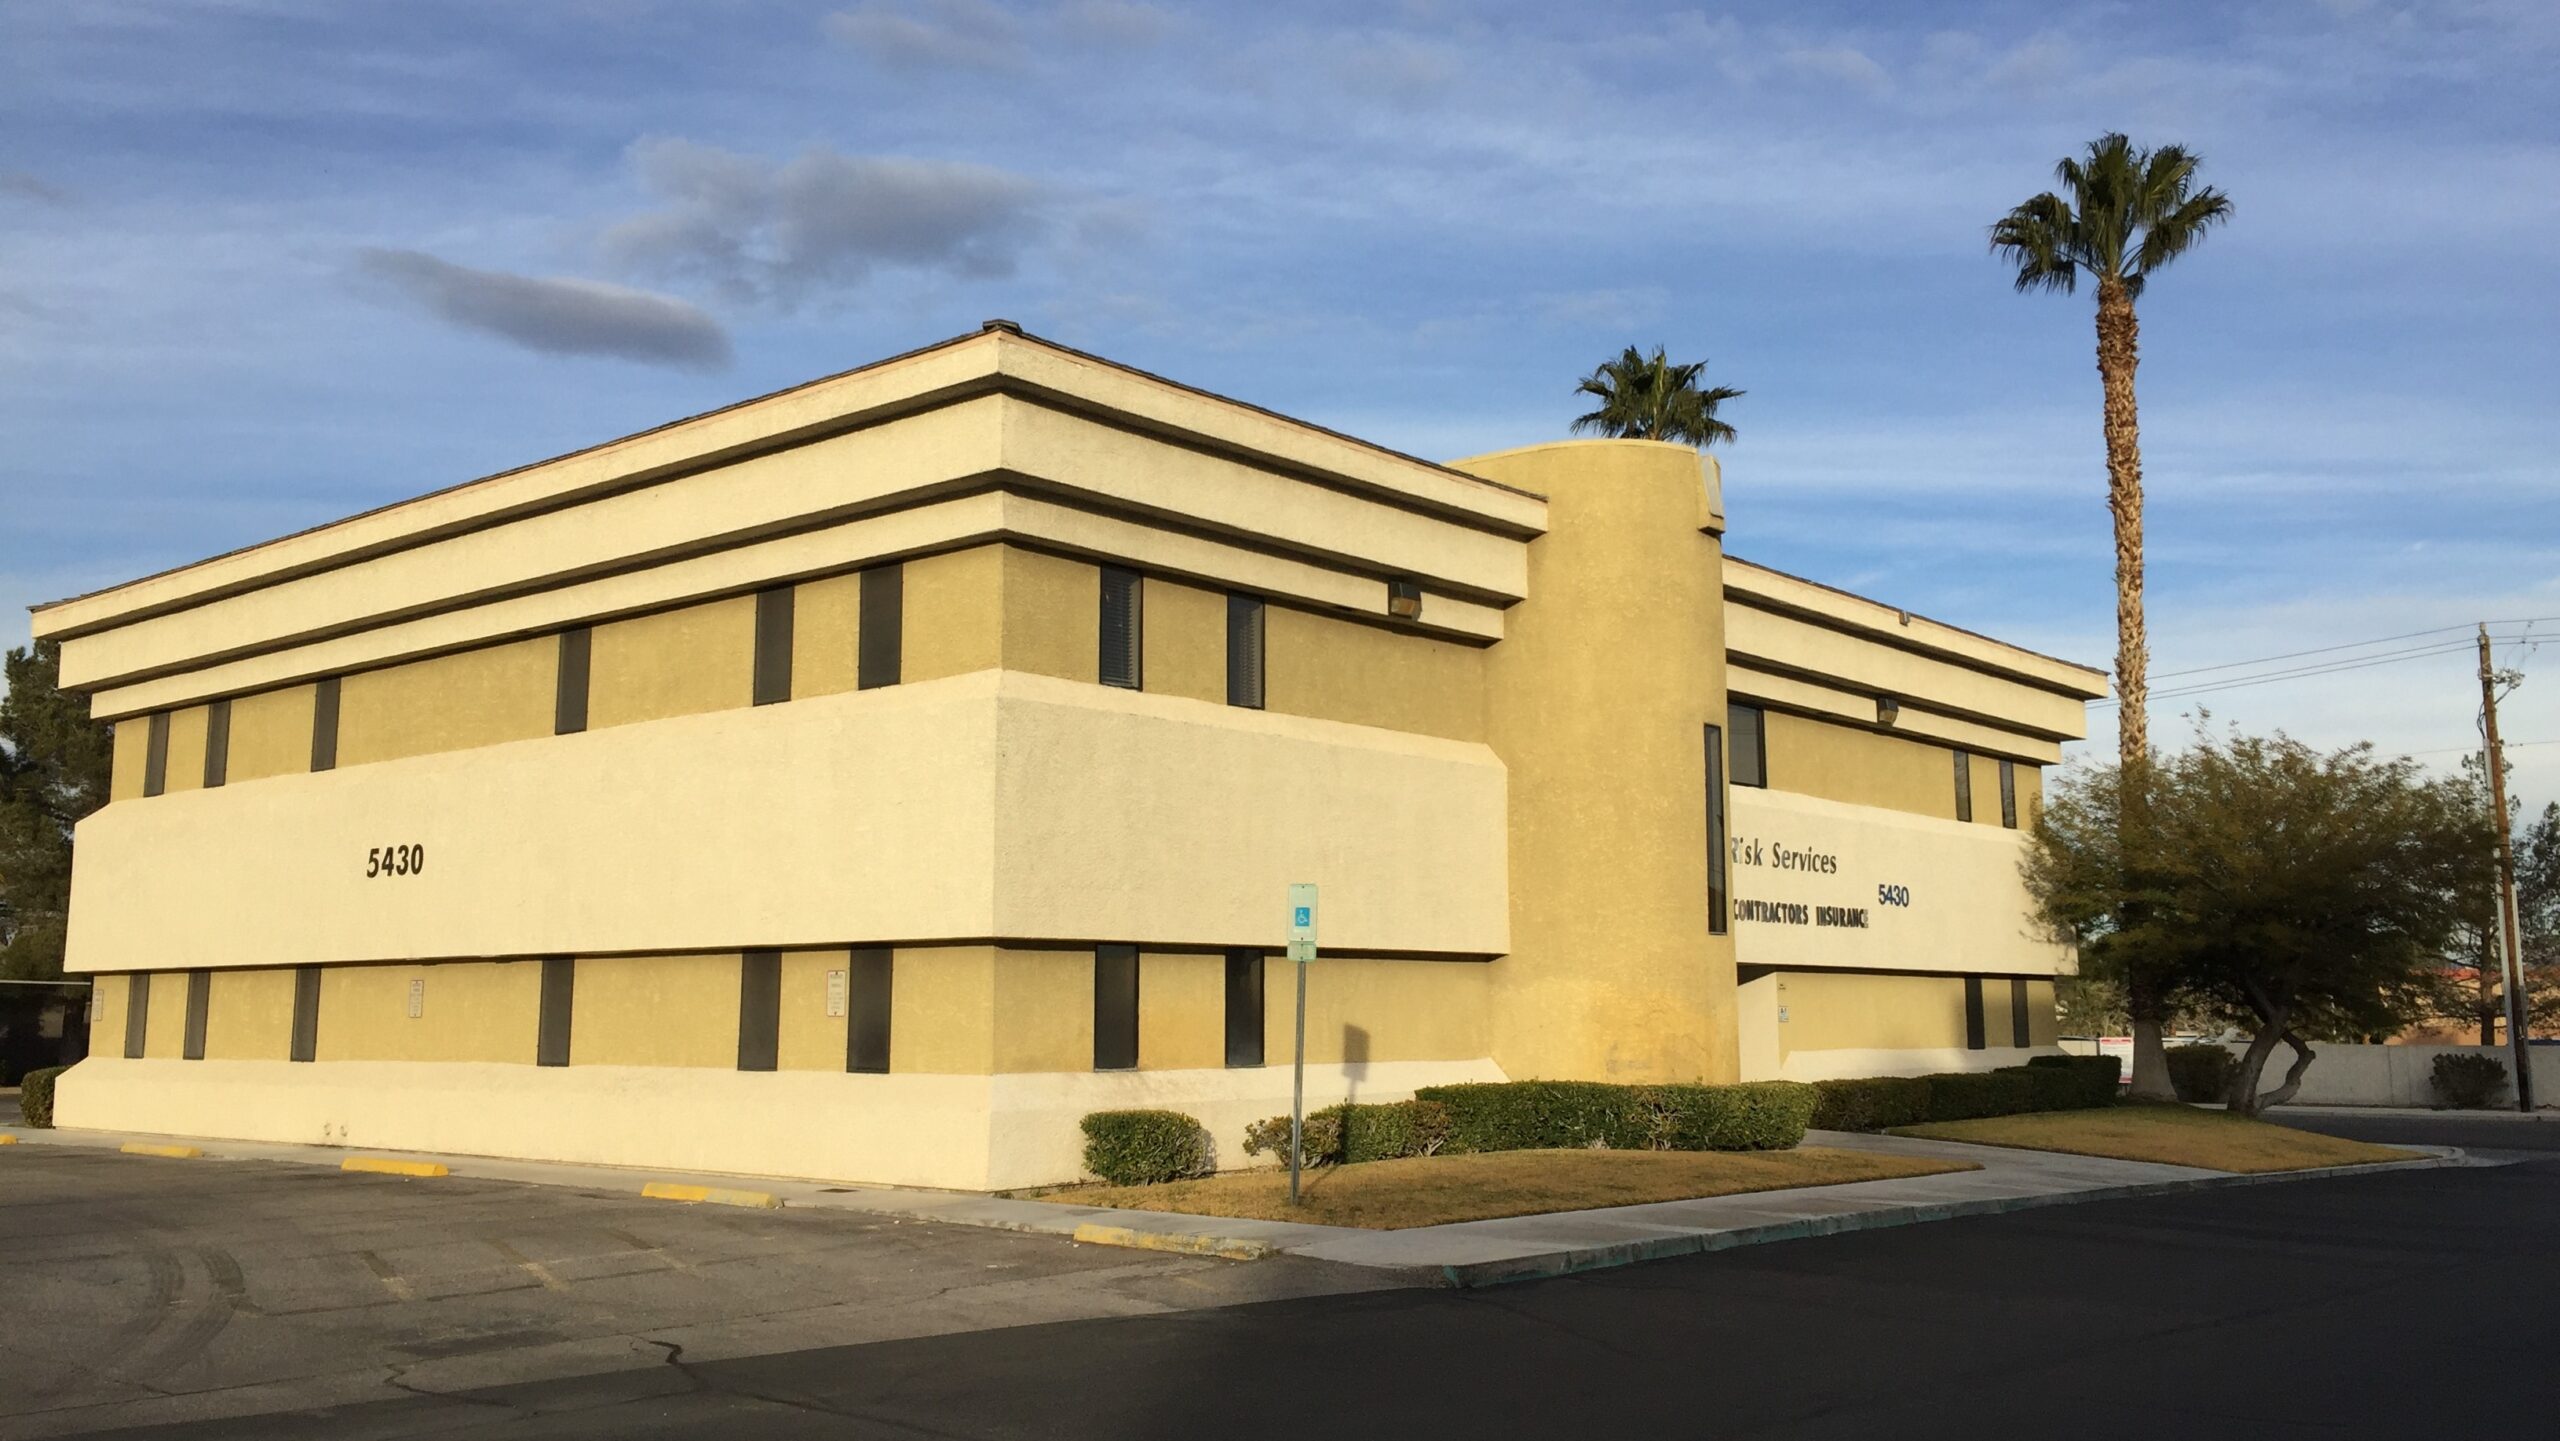 Cream colored commercial real estate building